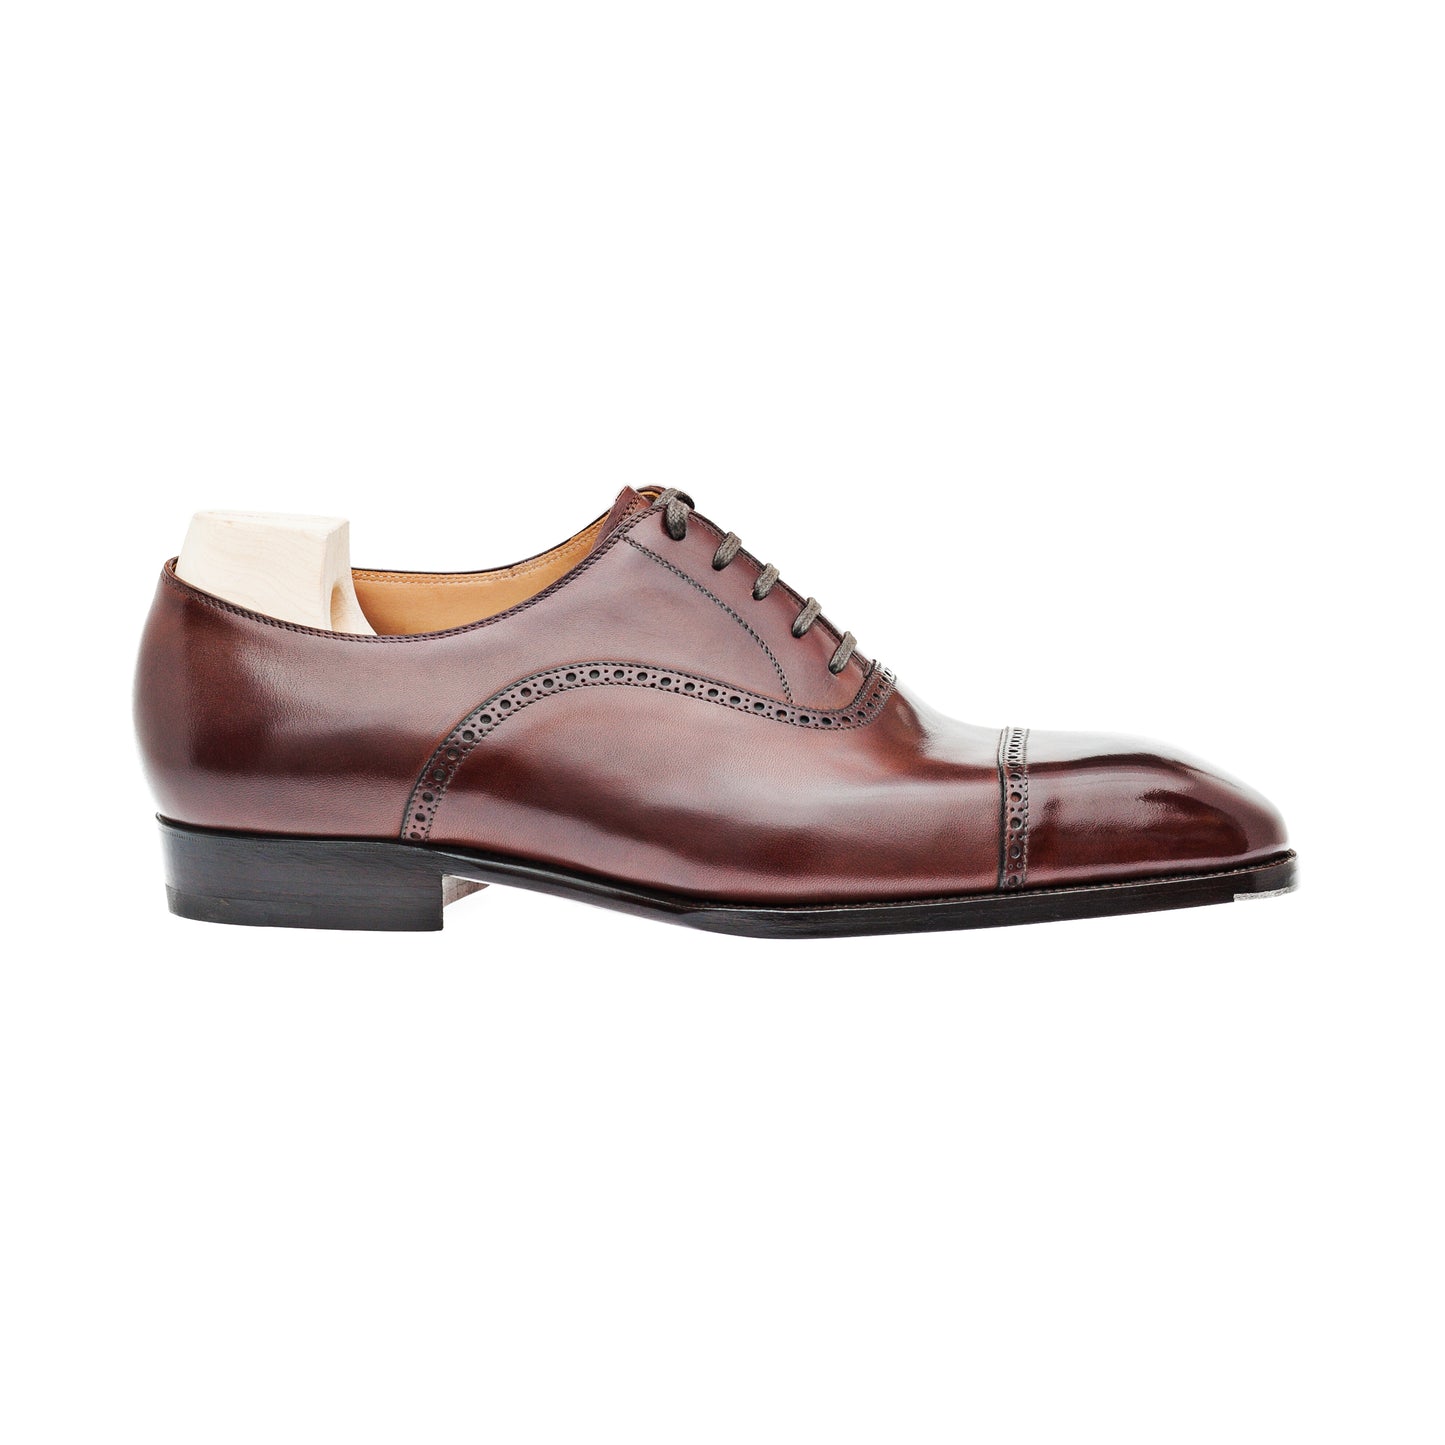 Straight toe cap Oxford, mid brown Crust calf leather, metal tips included